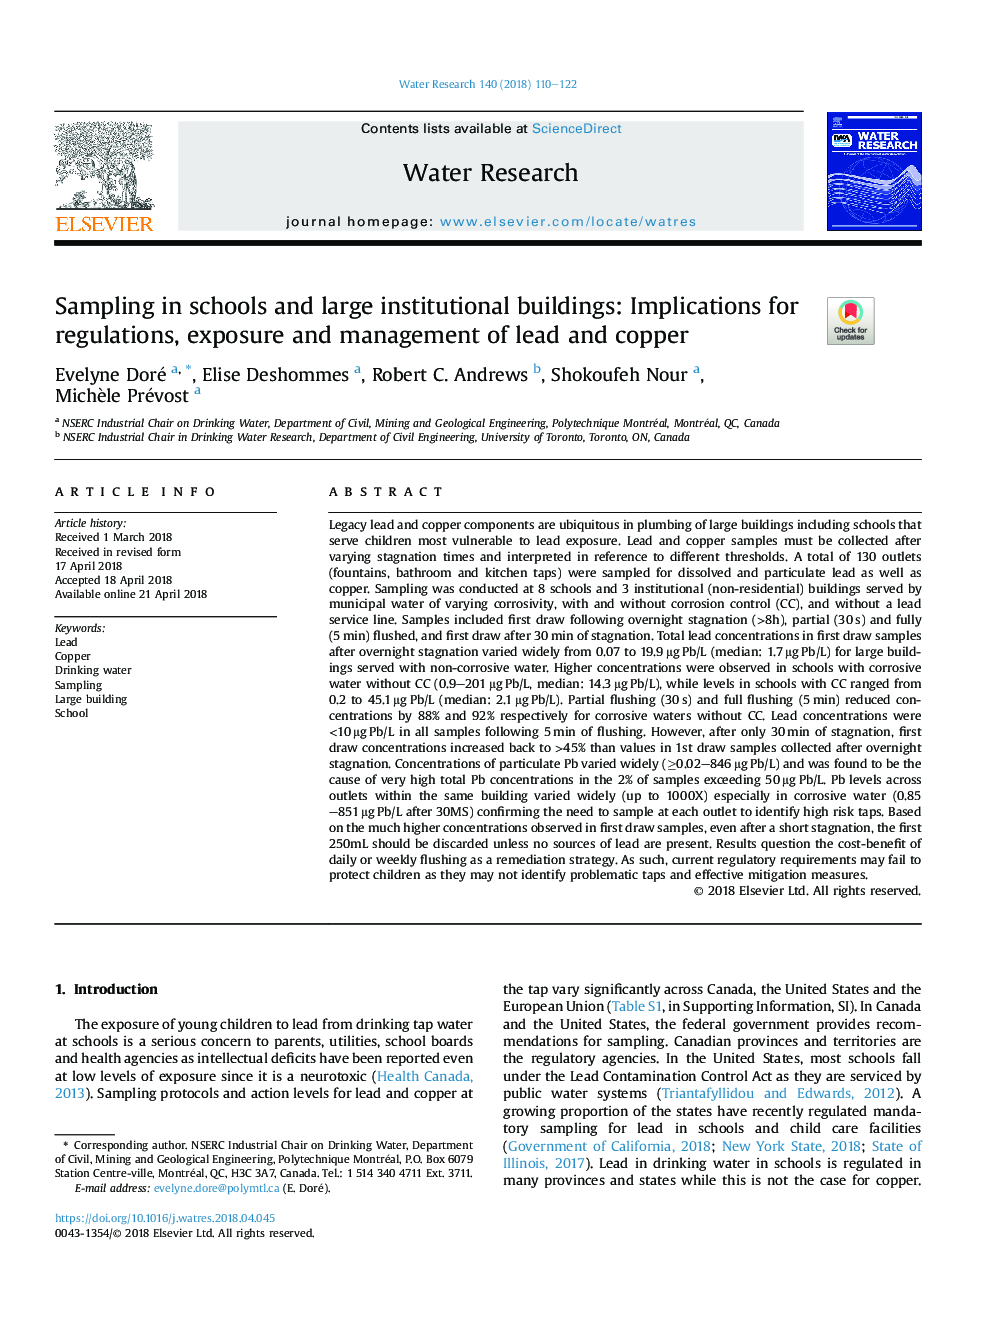 Sampling in schools and large institutional buildings: Implications for regulations, exposure and management of lead and copper